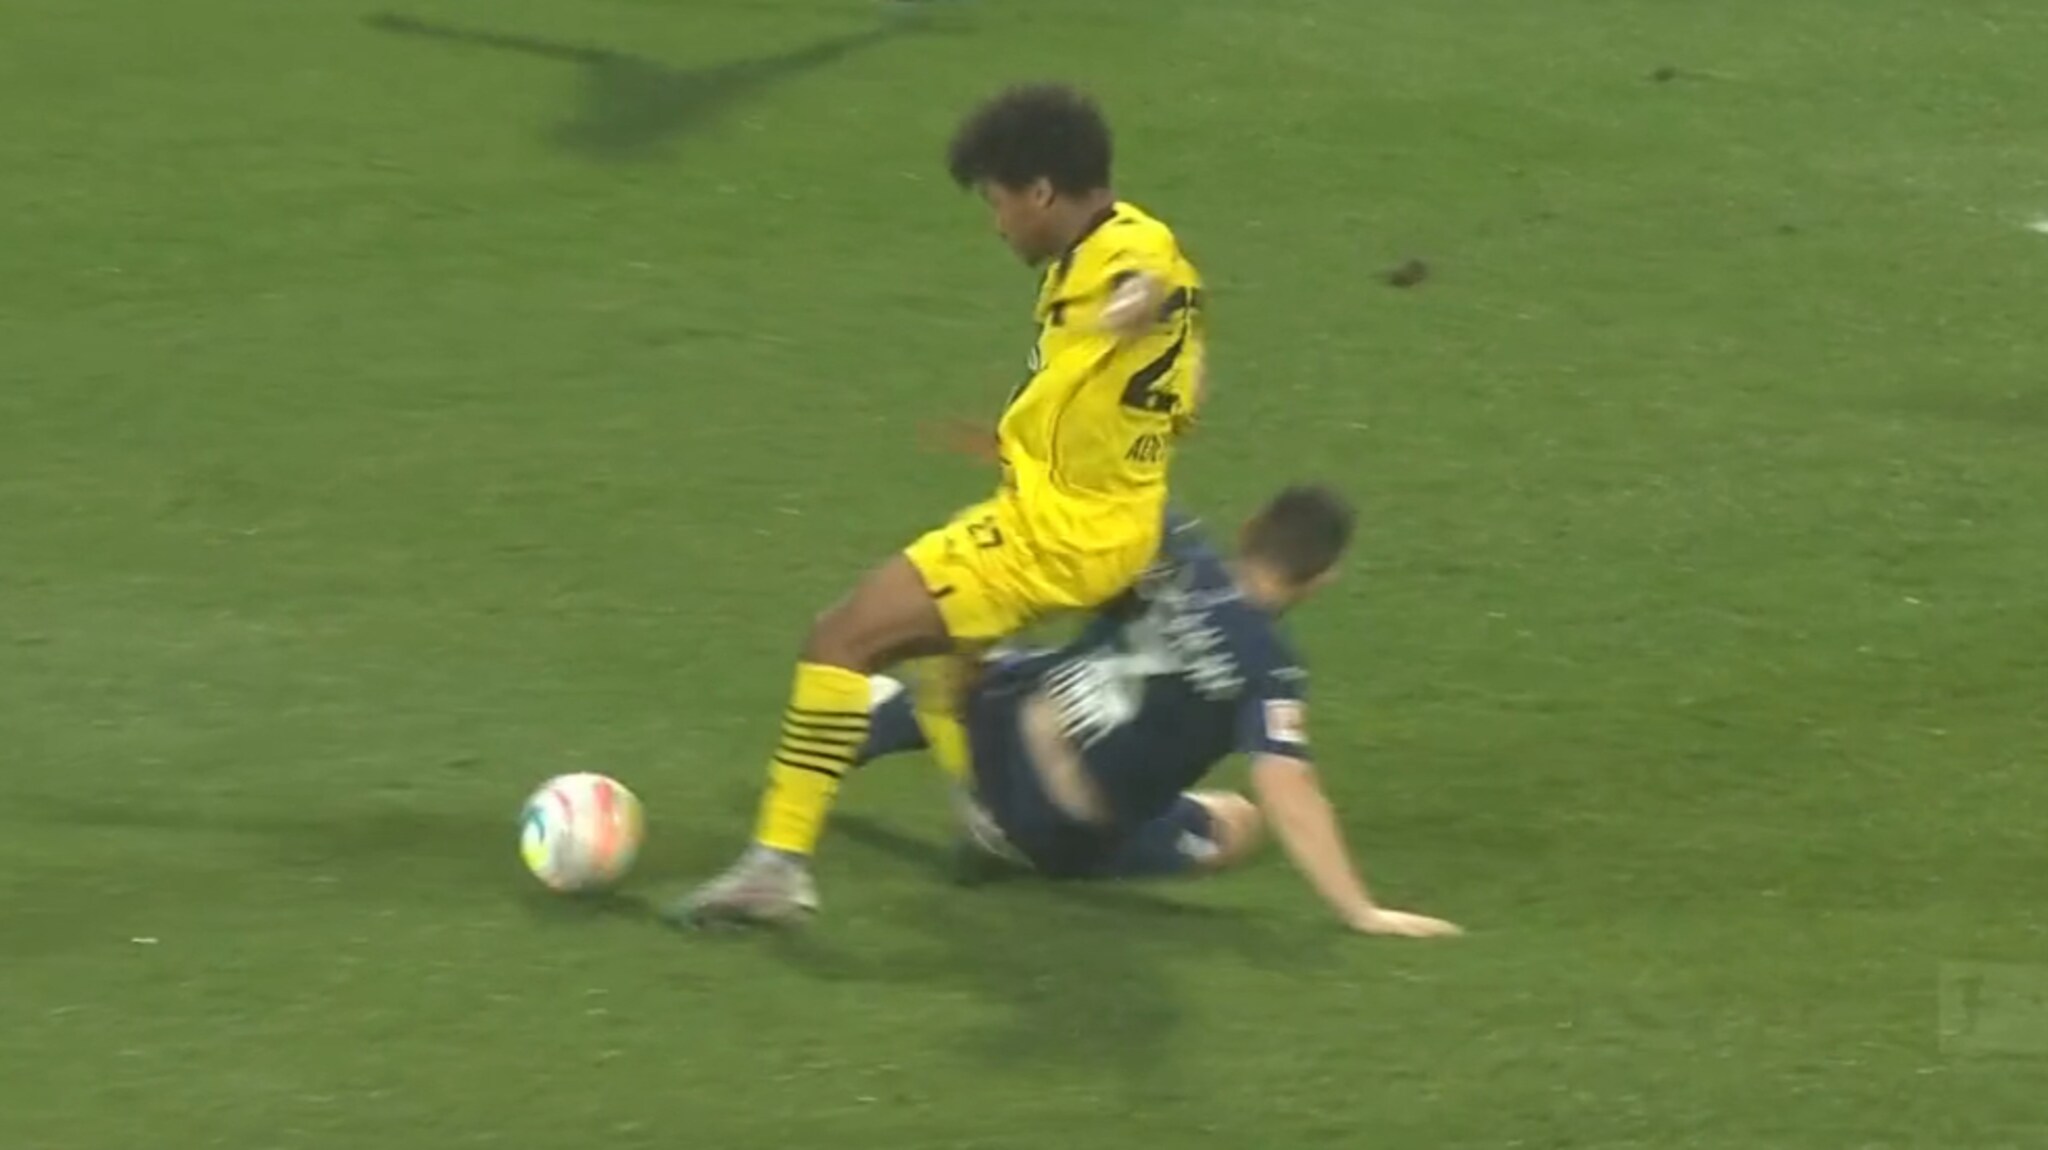 Threatening the referee after a huge mistake in the Dortmund match – he gets protection